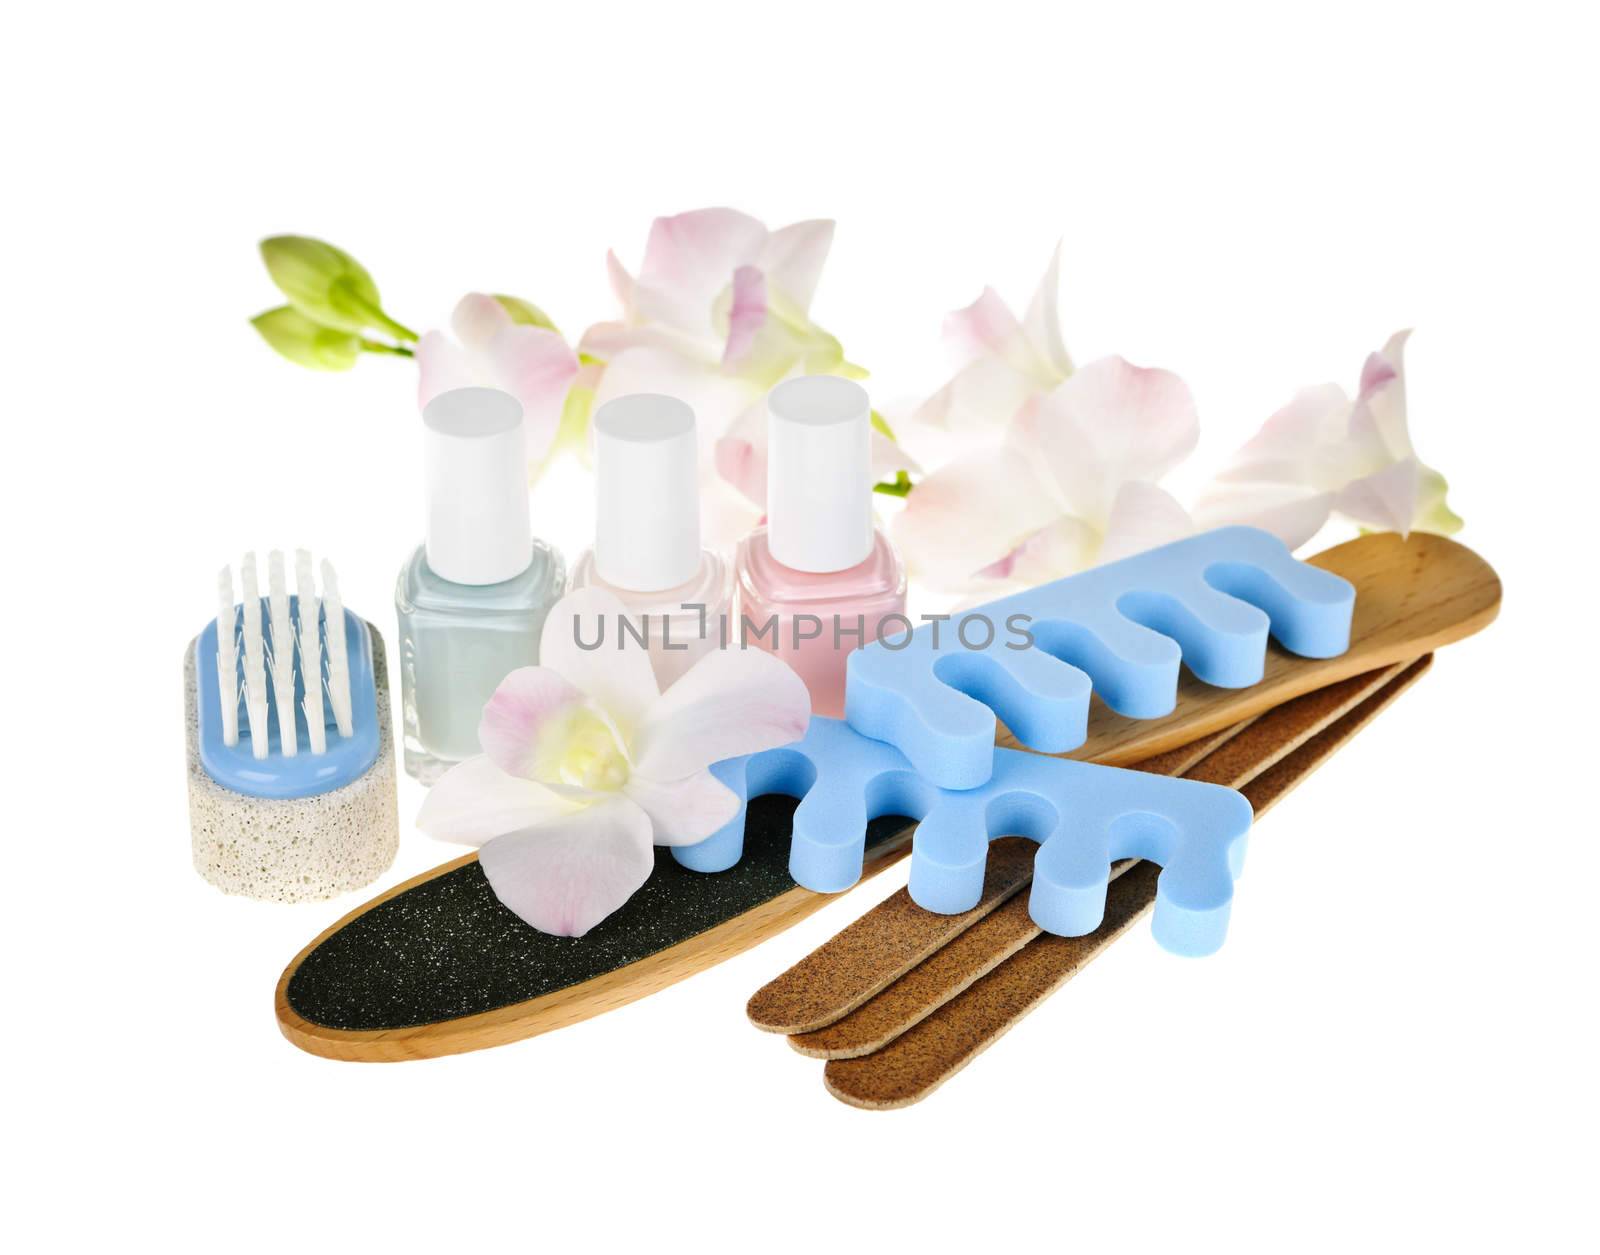 Pedicure accessories and tools by elenathewise